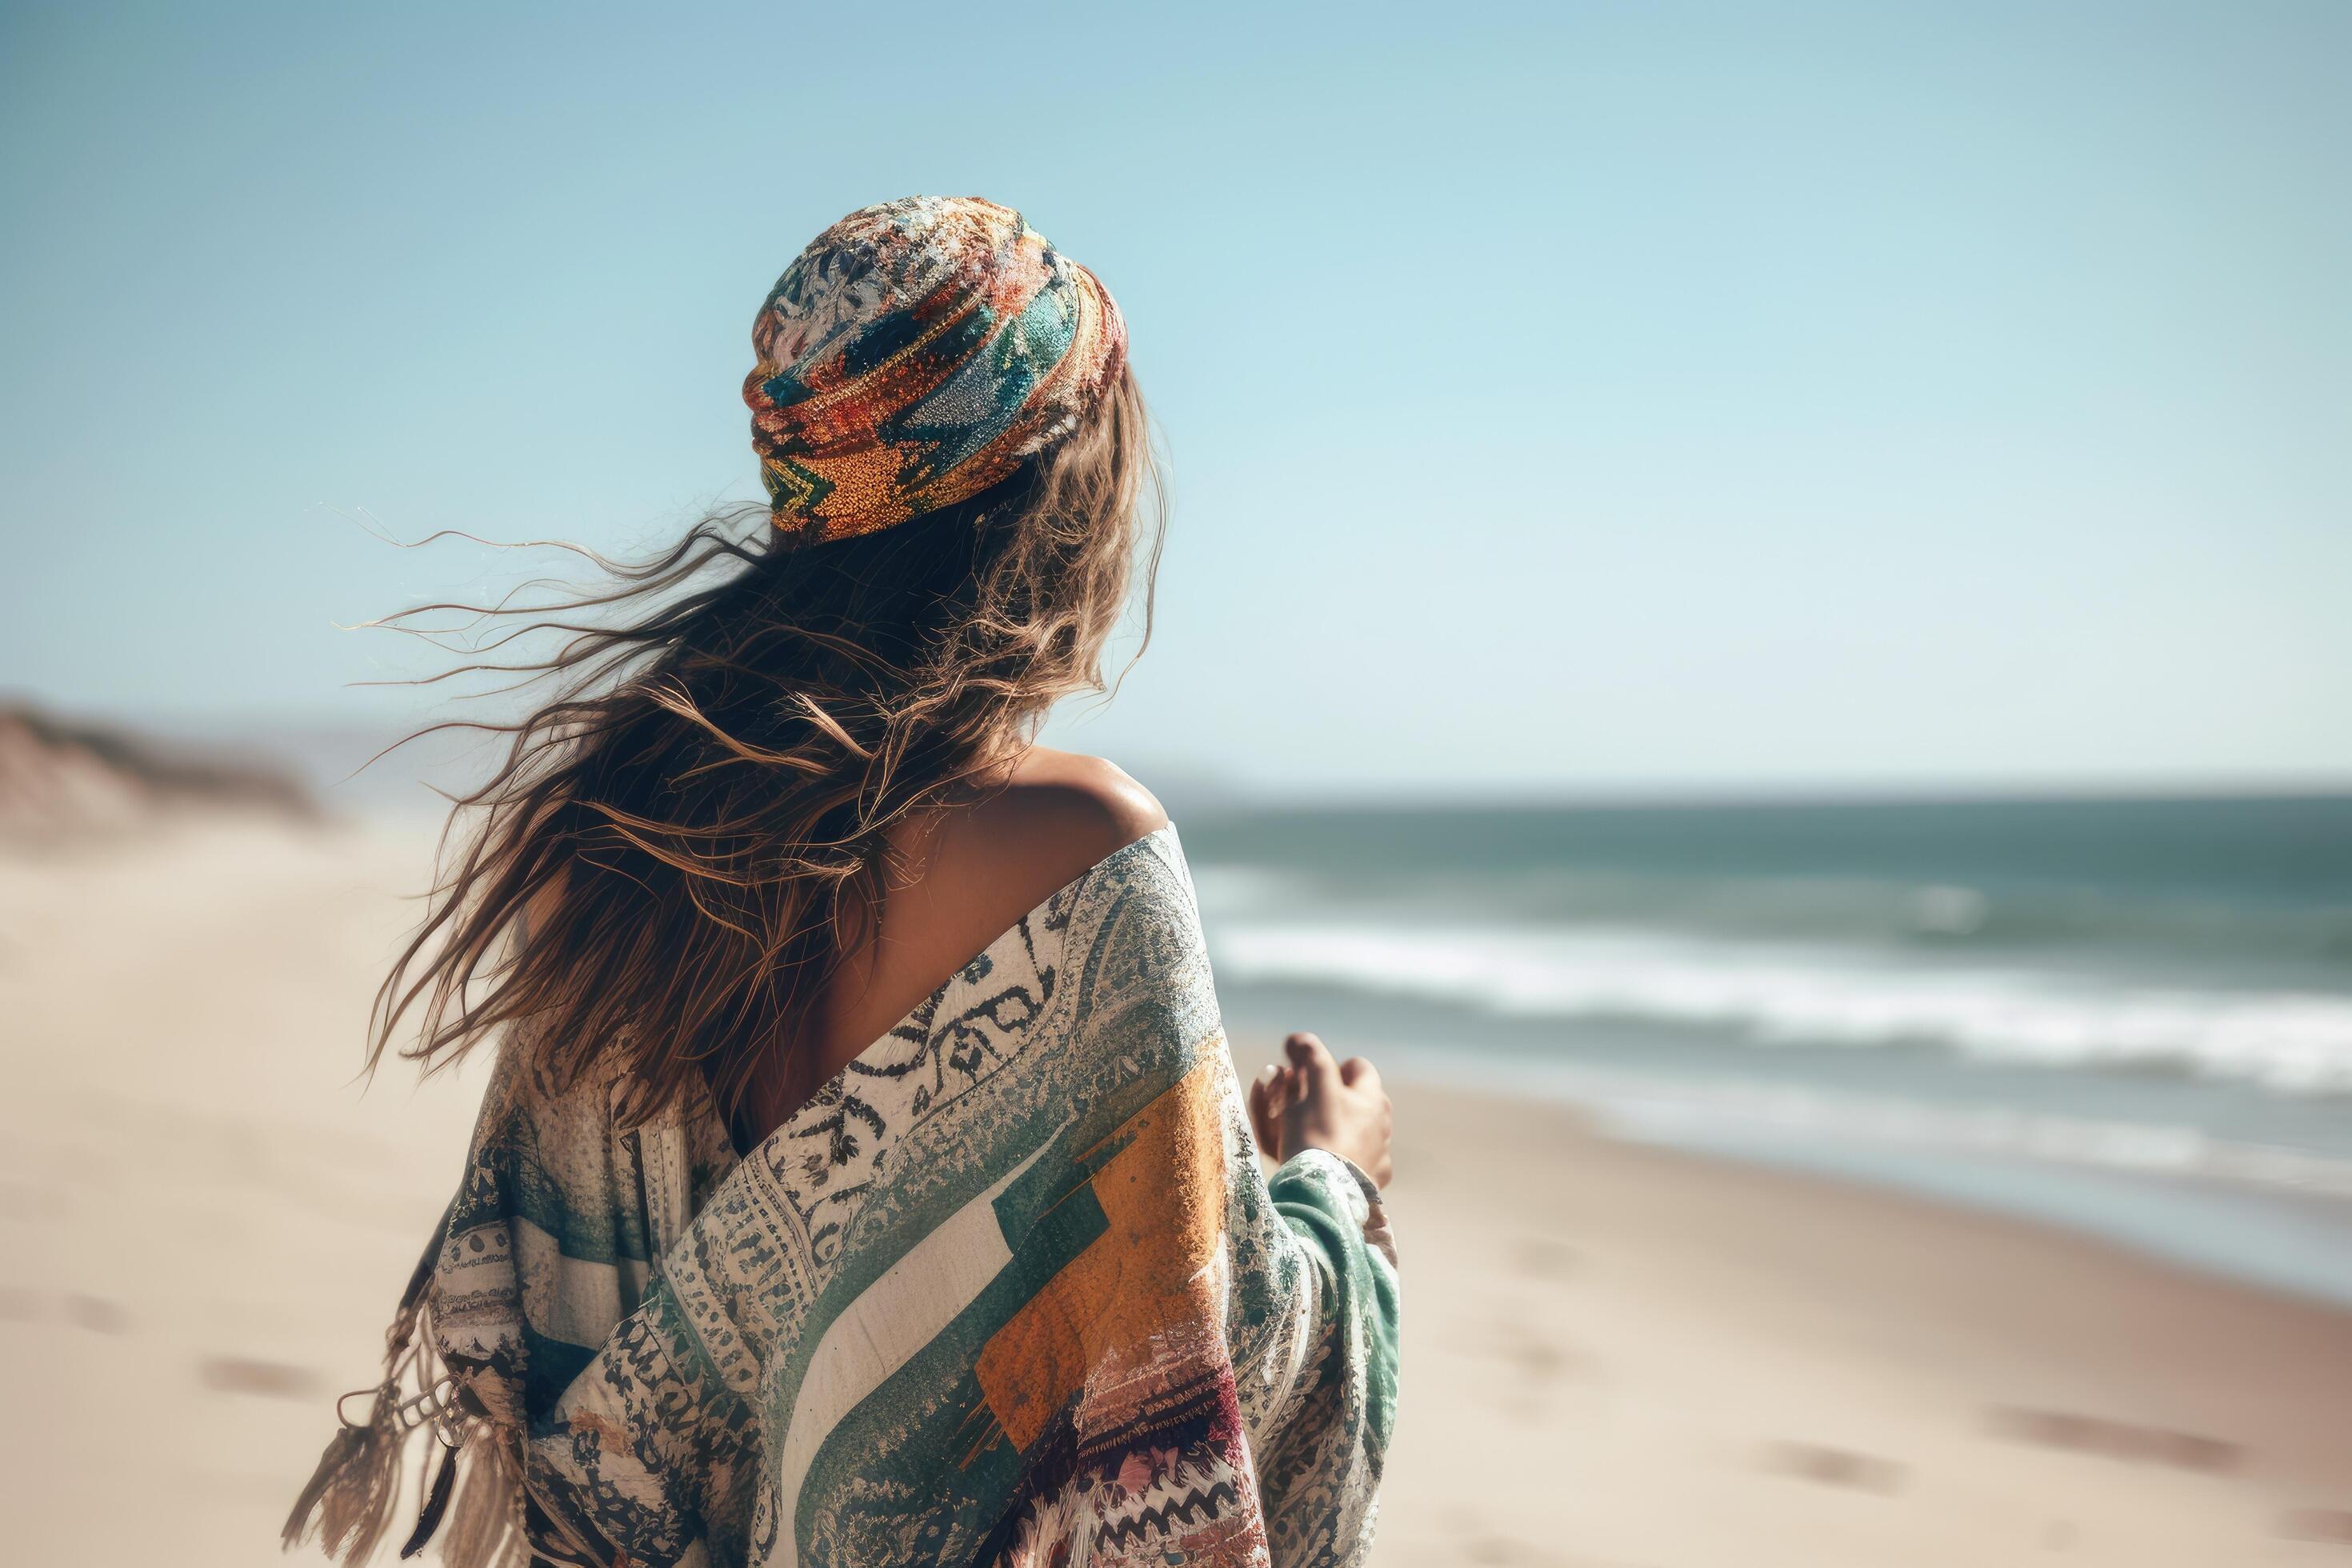 https://static.vecteezy.com/system/resources/previews/024/579/184/large_2x/portrait-of-beautiful-young-woman-with-long-hair-wearing-scarf-on-the-beach-a-young-bohemian-lady-wearing-boho-style-clothing-on-a-beach-ai-generated-free-photo.jpg